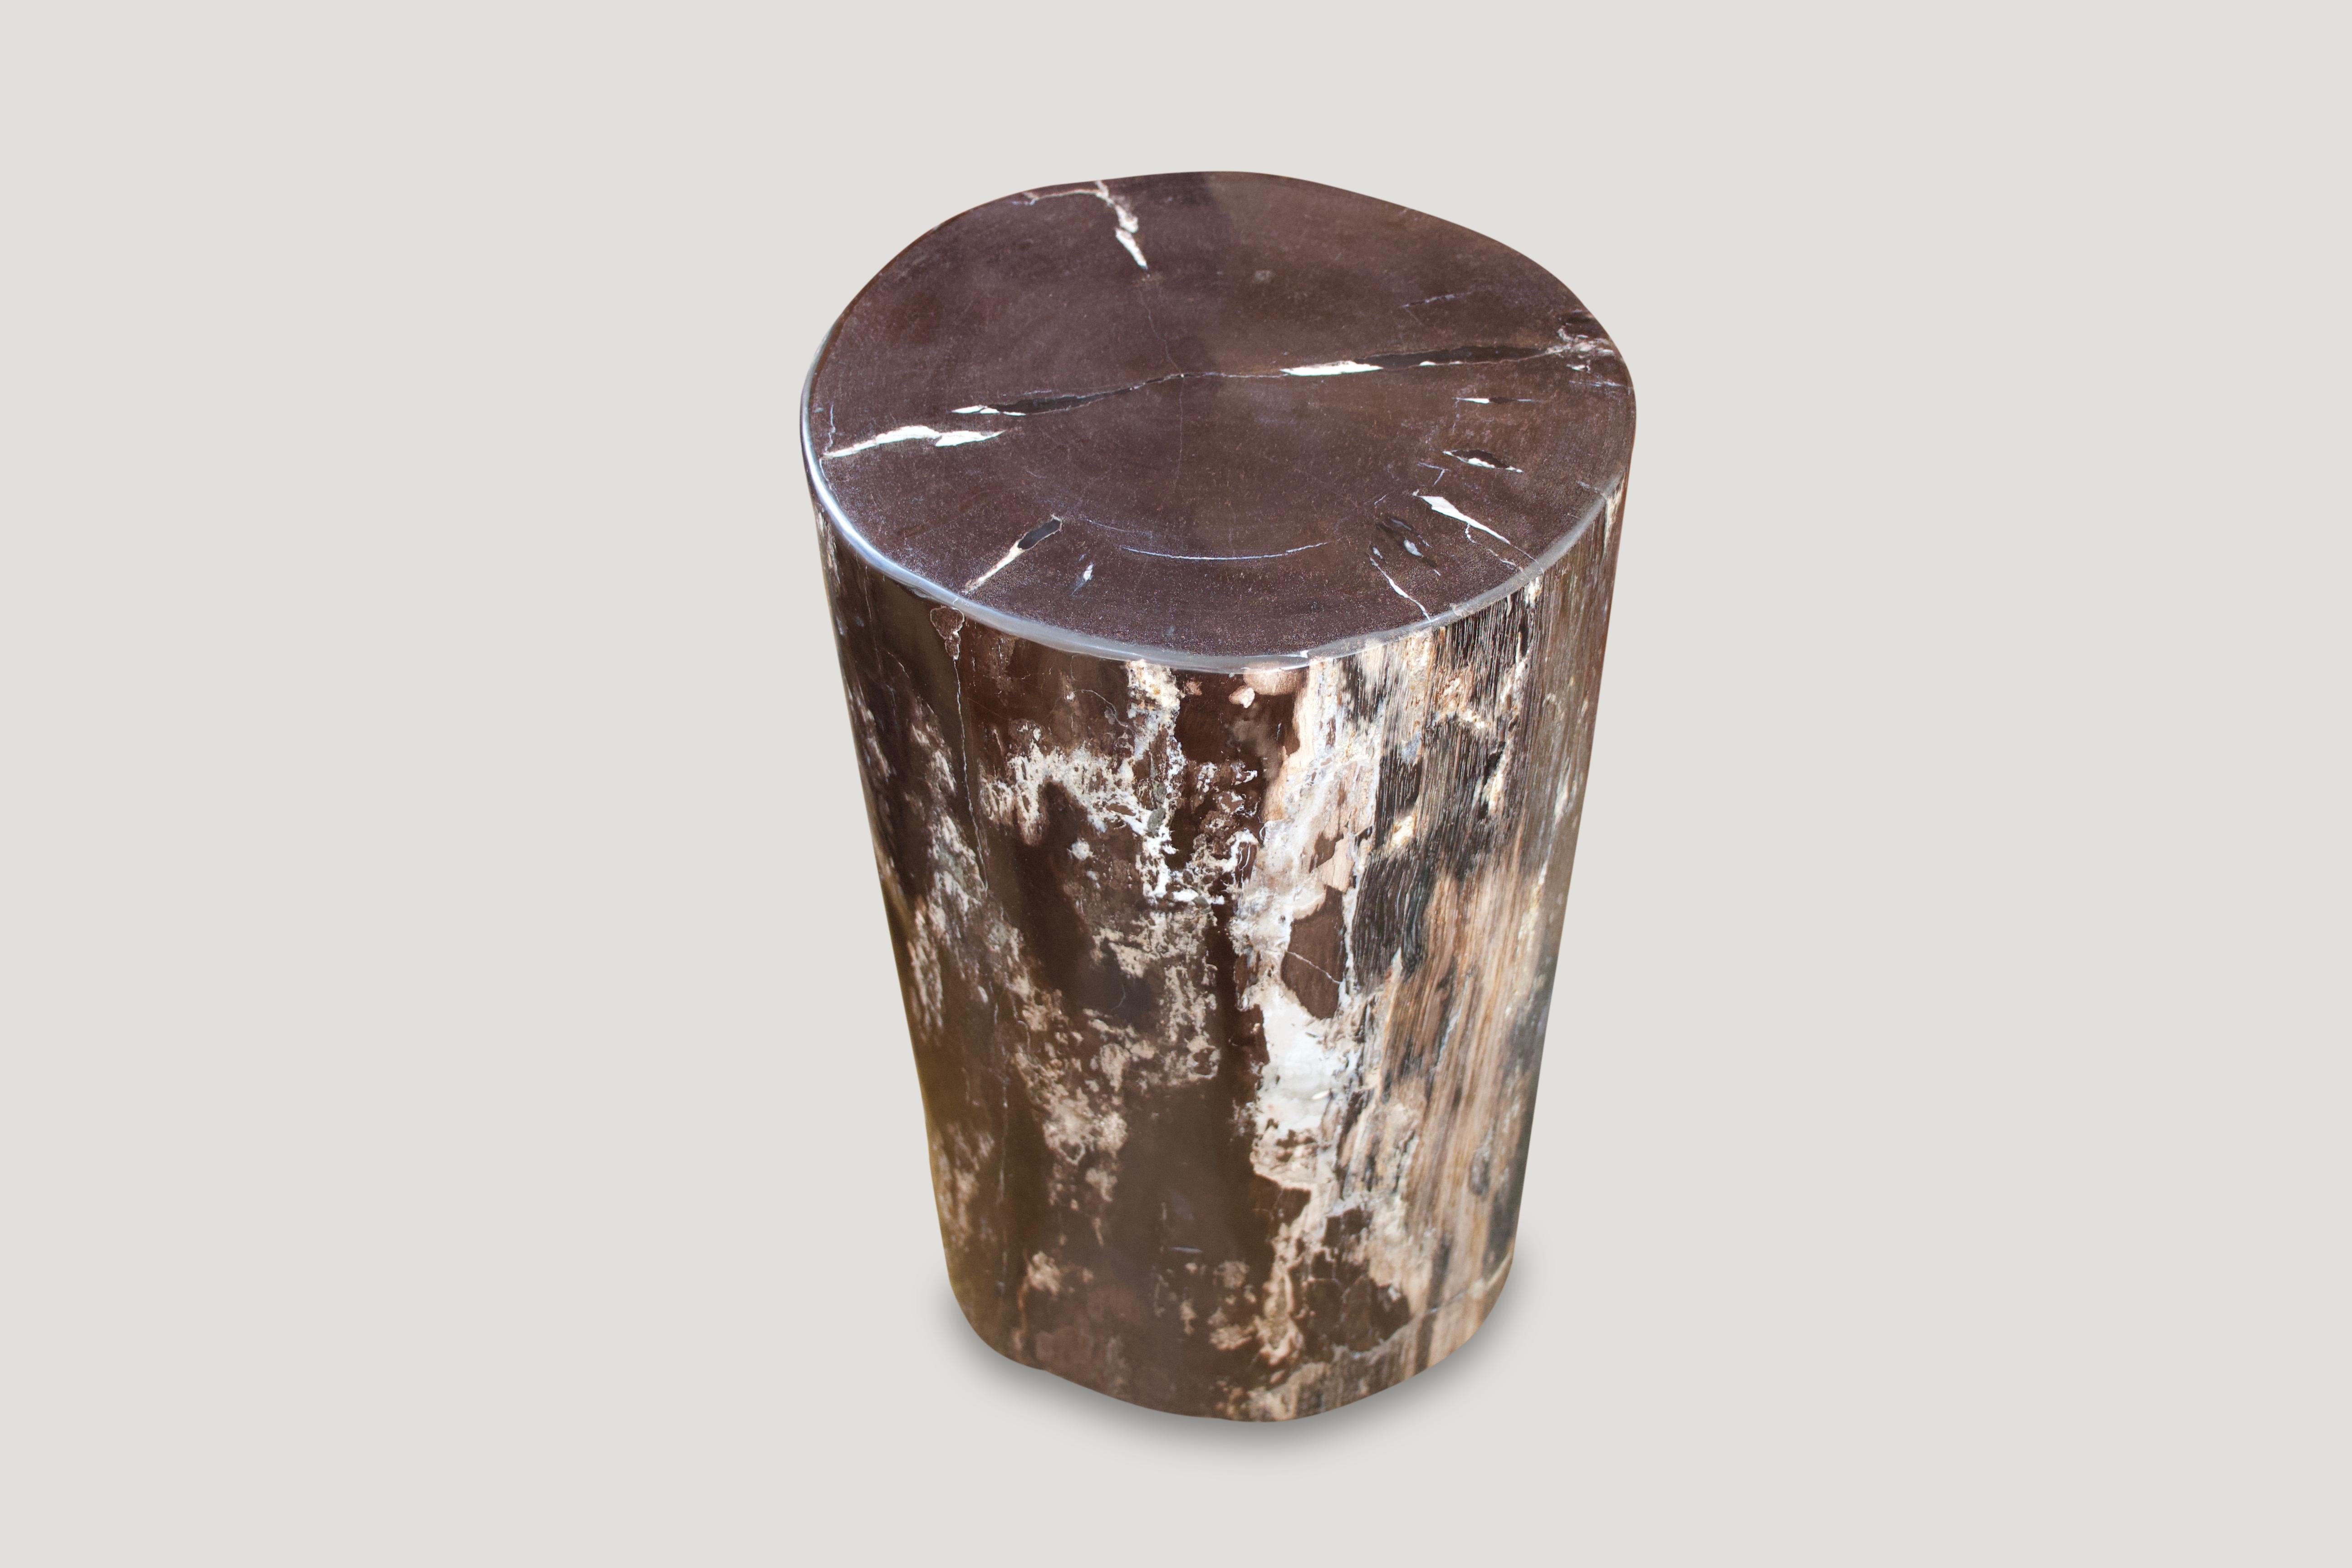 Fabulous black, green and white petrified wood side table. Over 40 million years old, yet so modern when these fossilized petrified logs are polished and when the logs sourced are in this very special contrasting color tone. We have a collection all